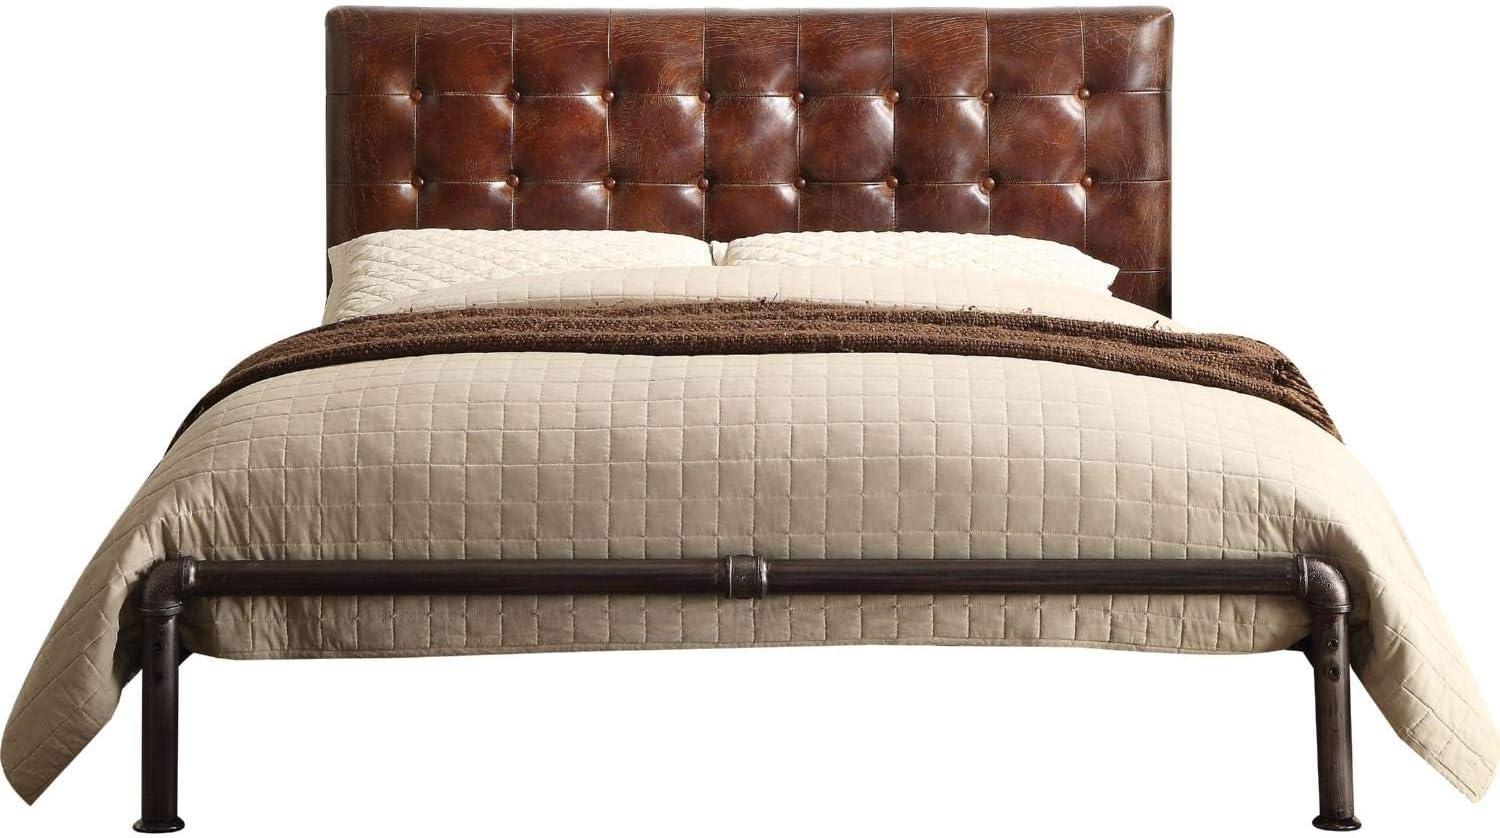 Vintage Brown Top Grain Leather Queen Bed with Tufted Headboard